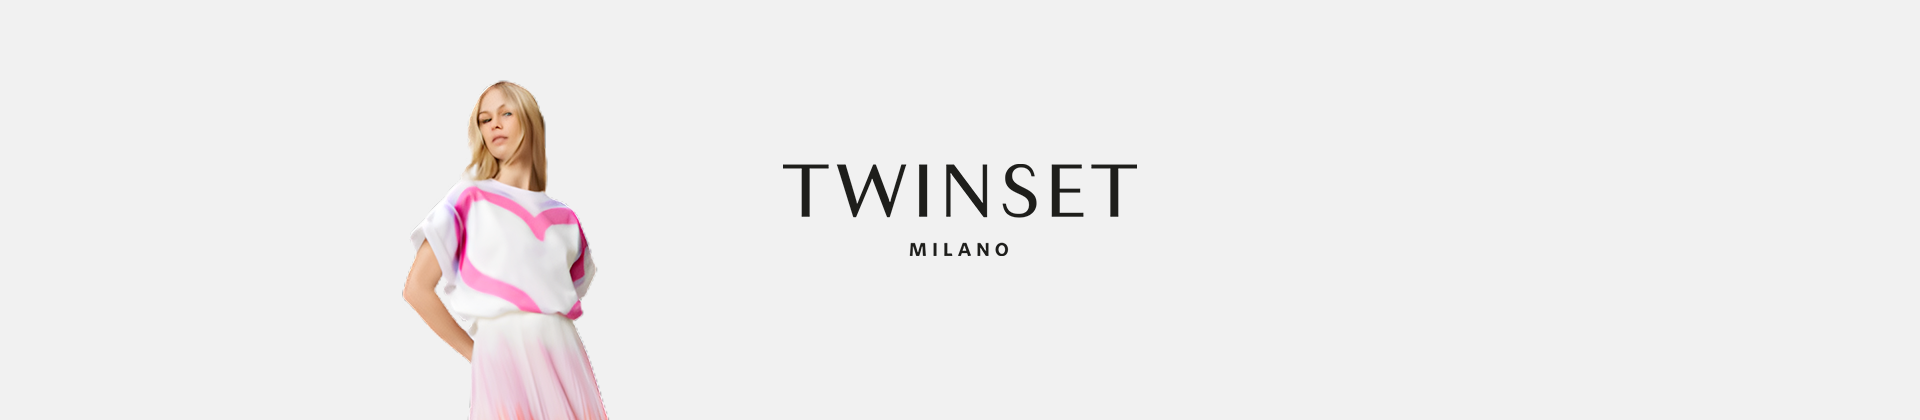 Twin Set sito online borse donna | Youngshoessalerno.it